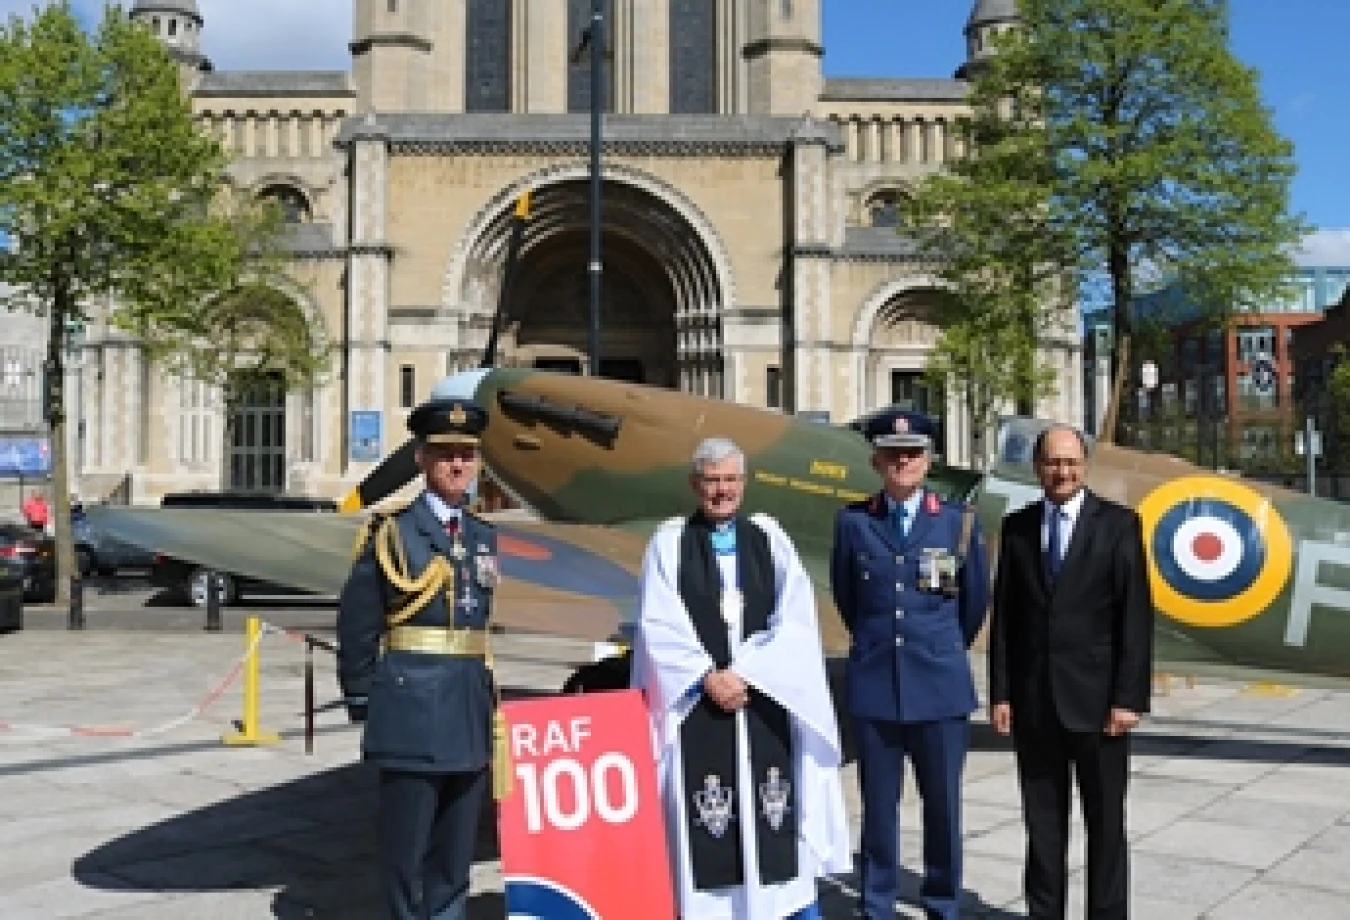 RAF Centenary Service takes place in Belfast Cathedral